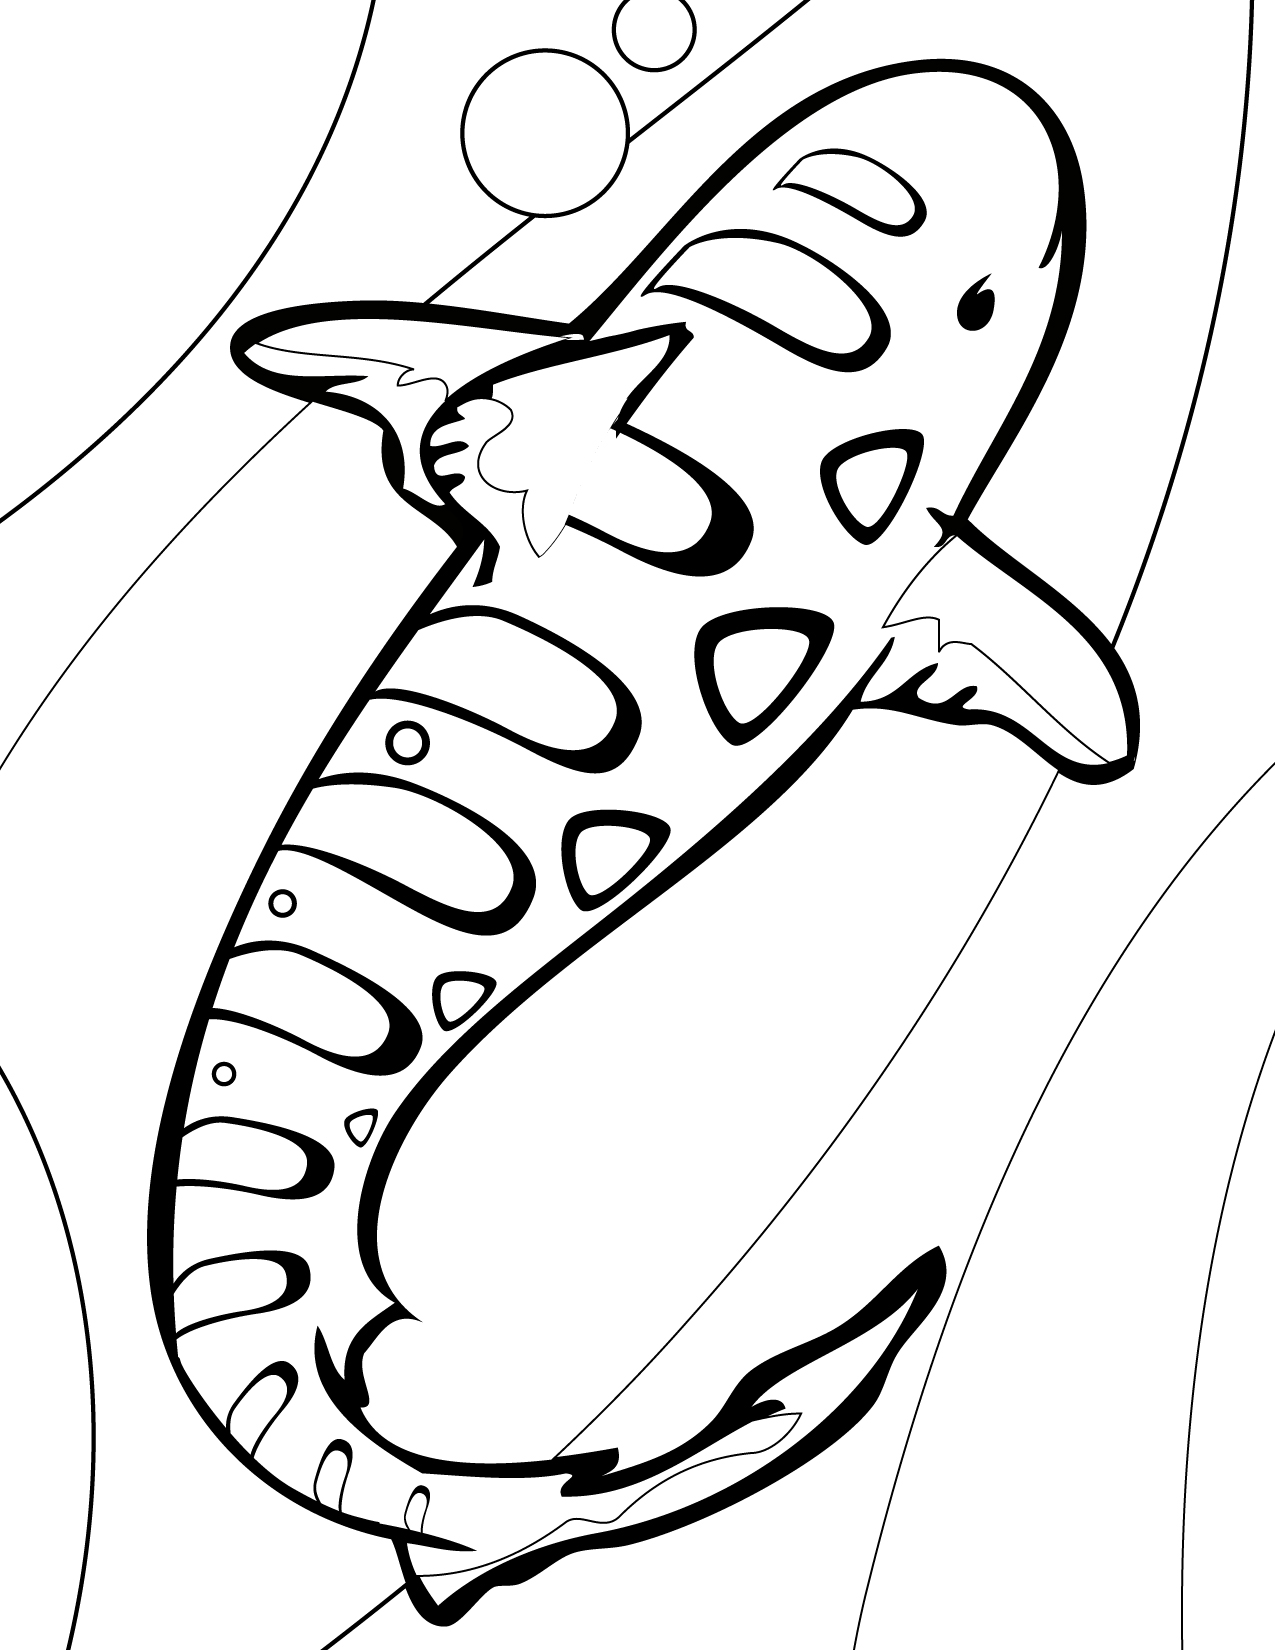 Leopard Shark Coloring Page - Handipoints